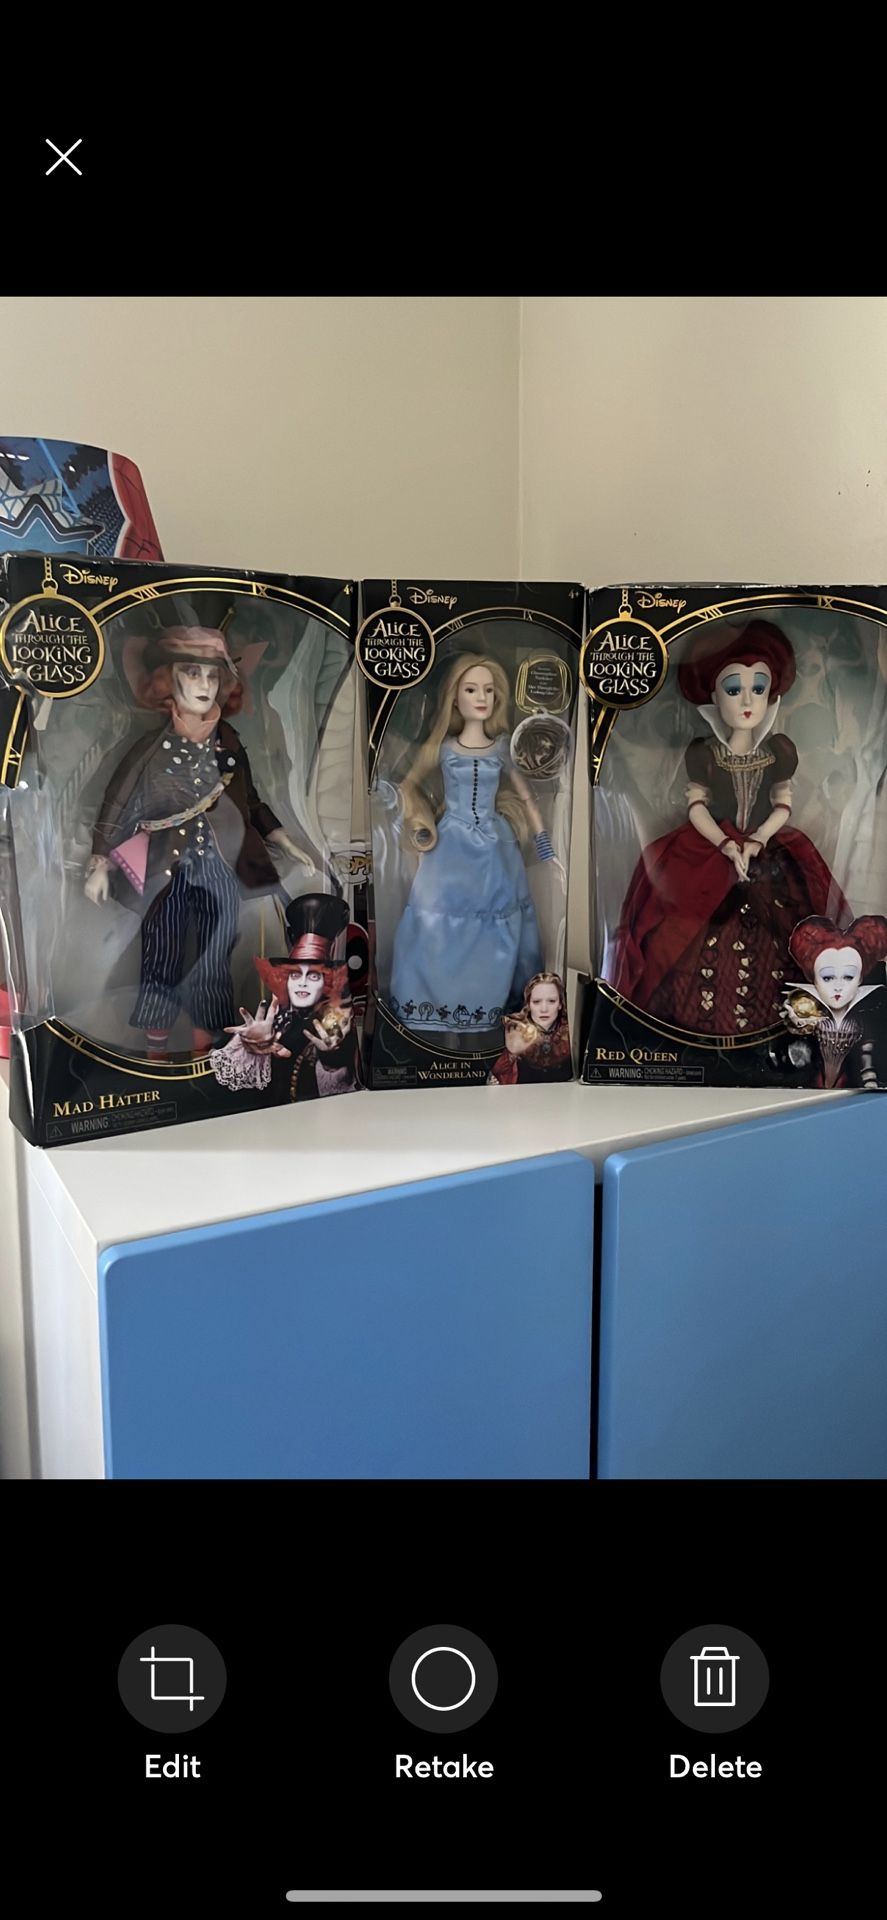 Collectible Alice Through The Looking Glass Dolls